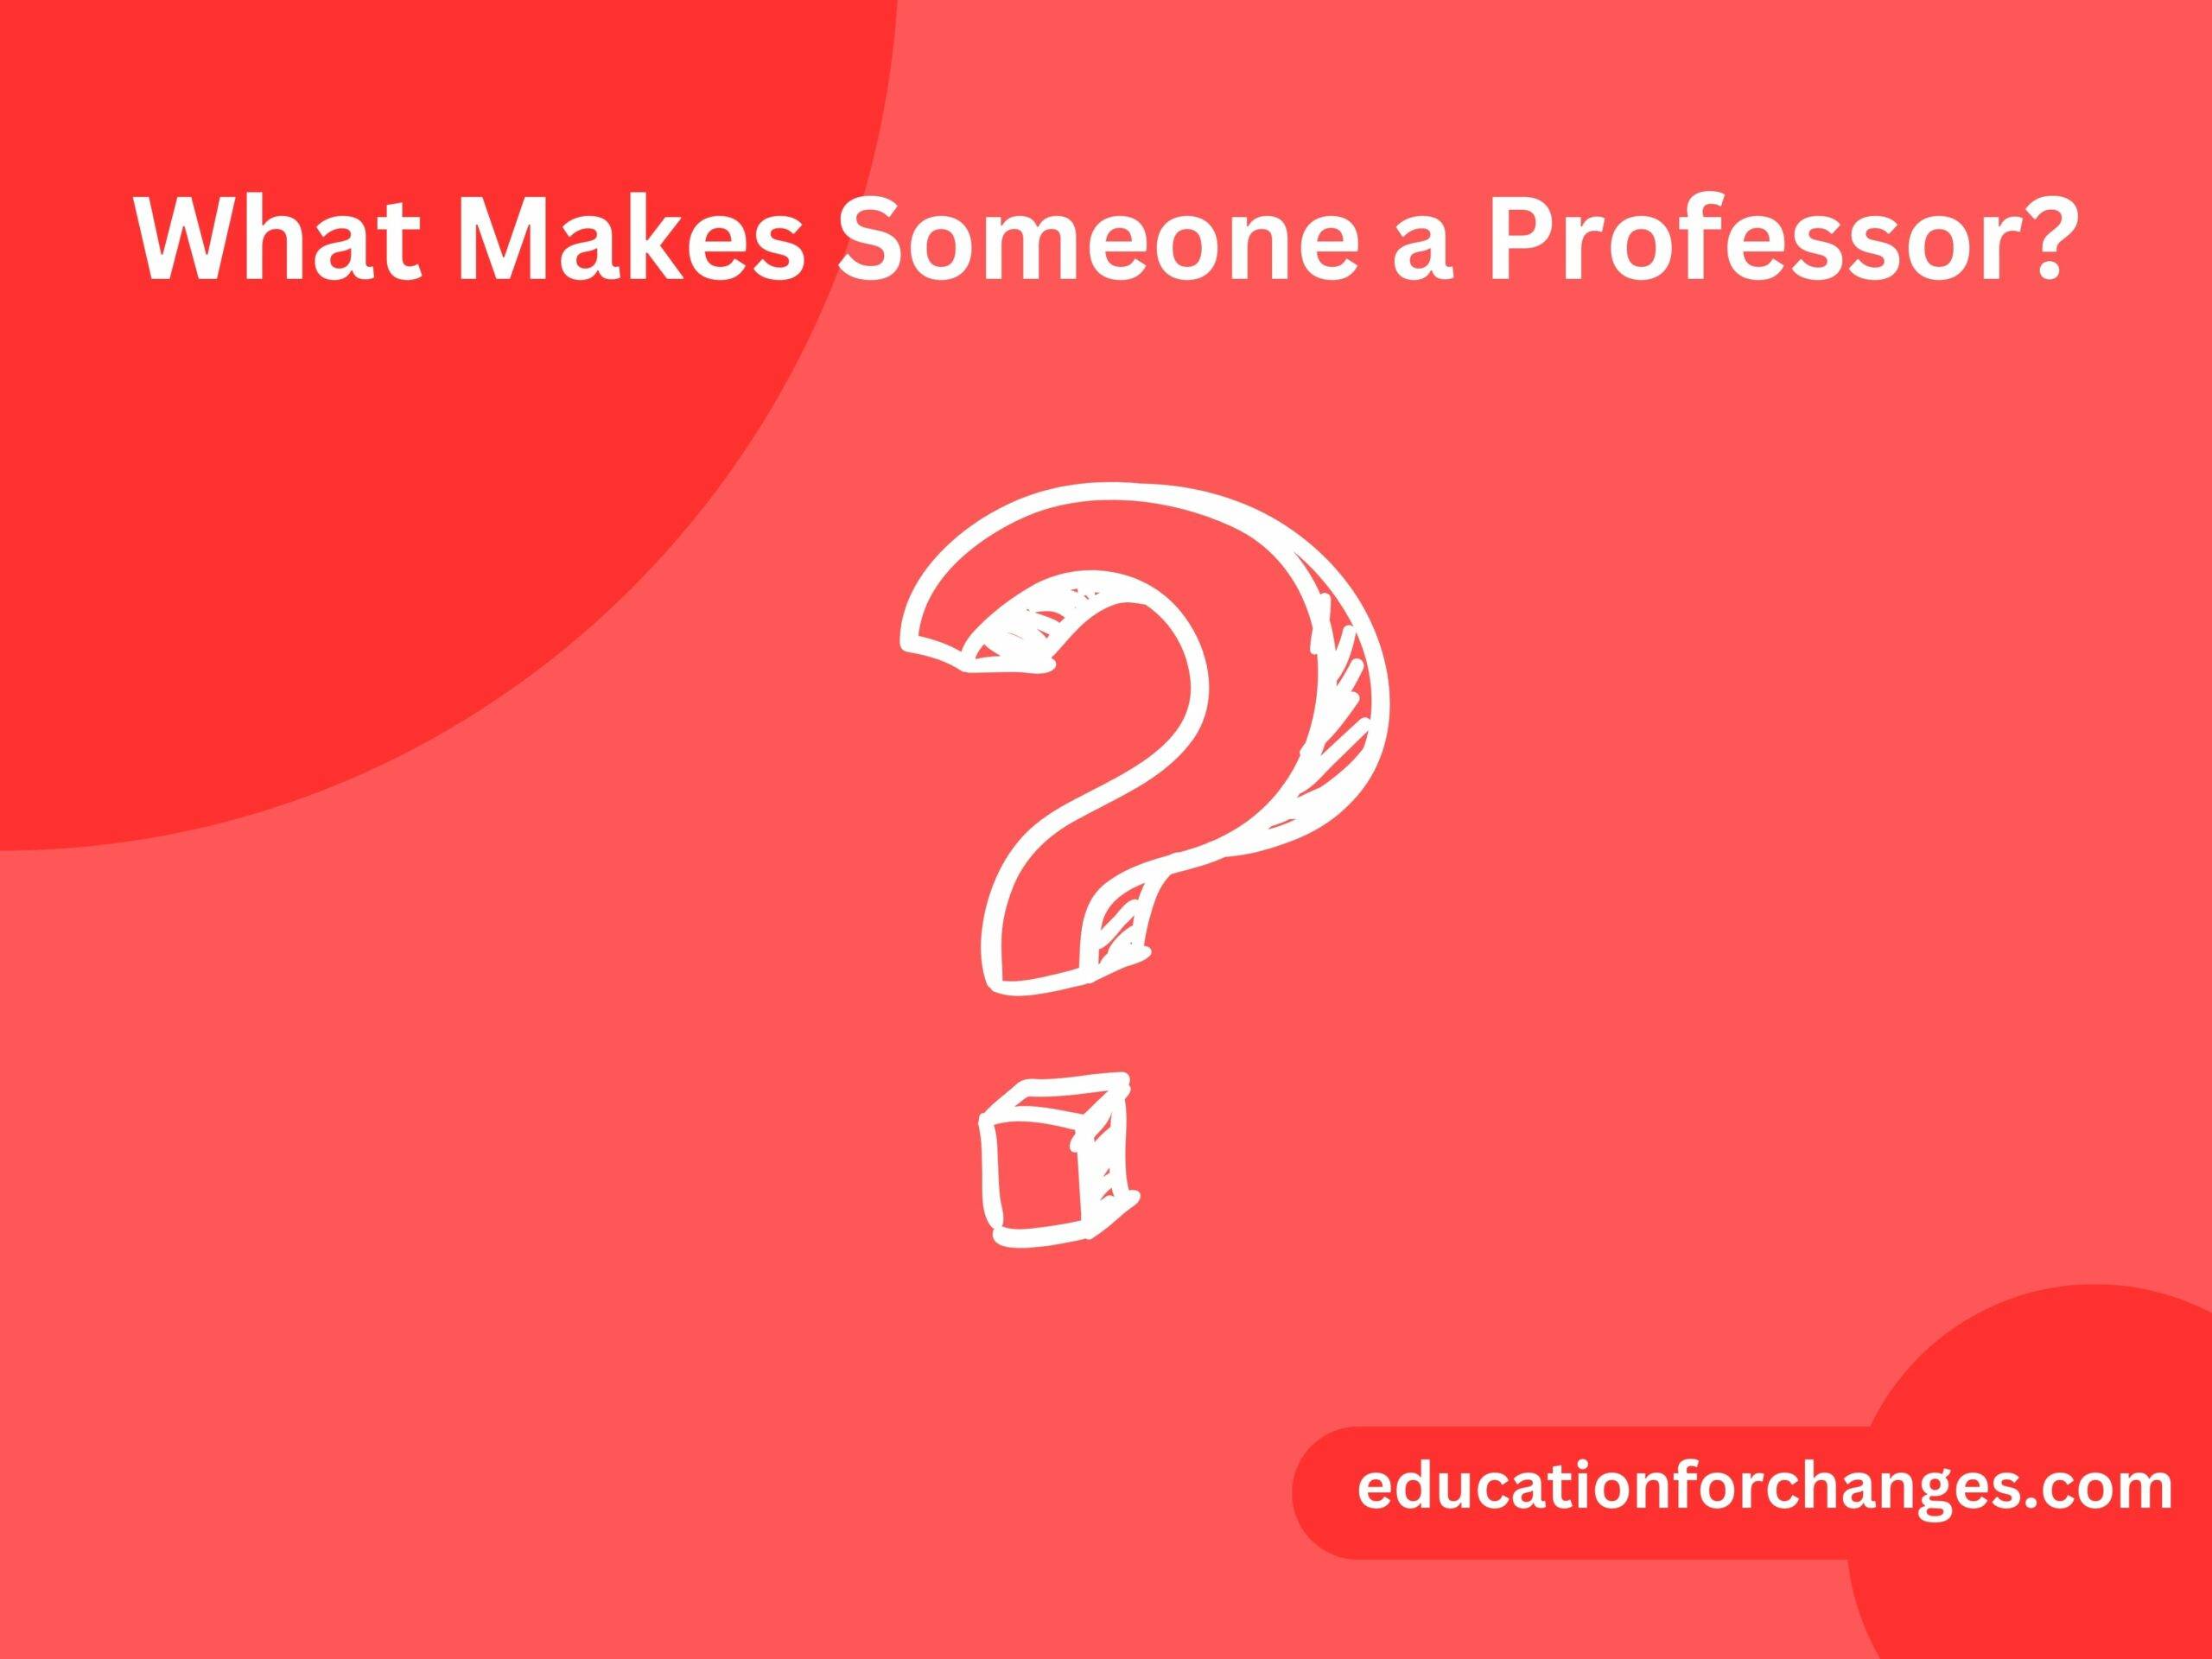 What Makes Someone a Professor